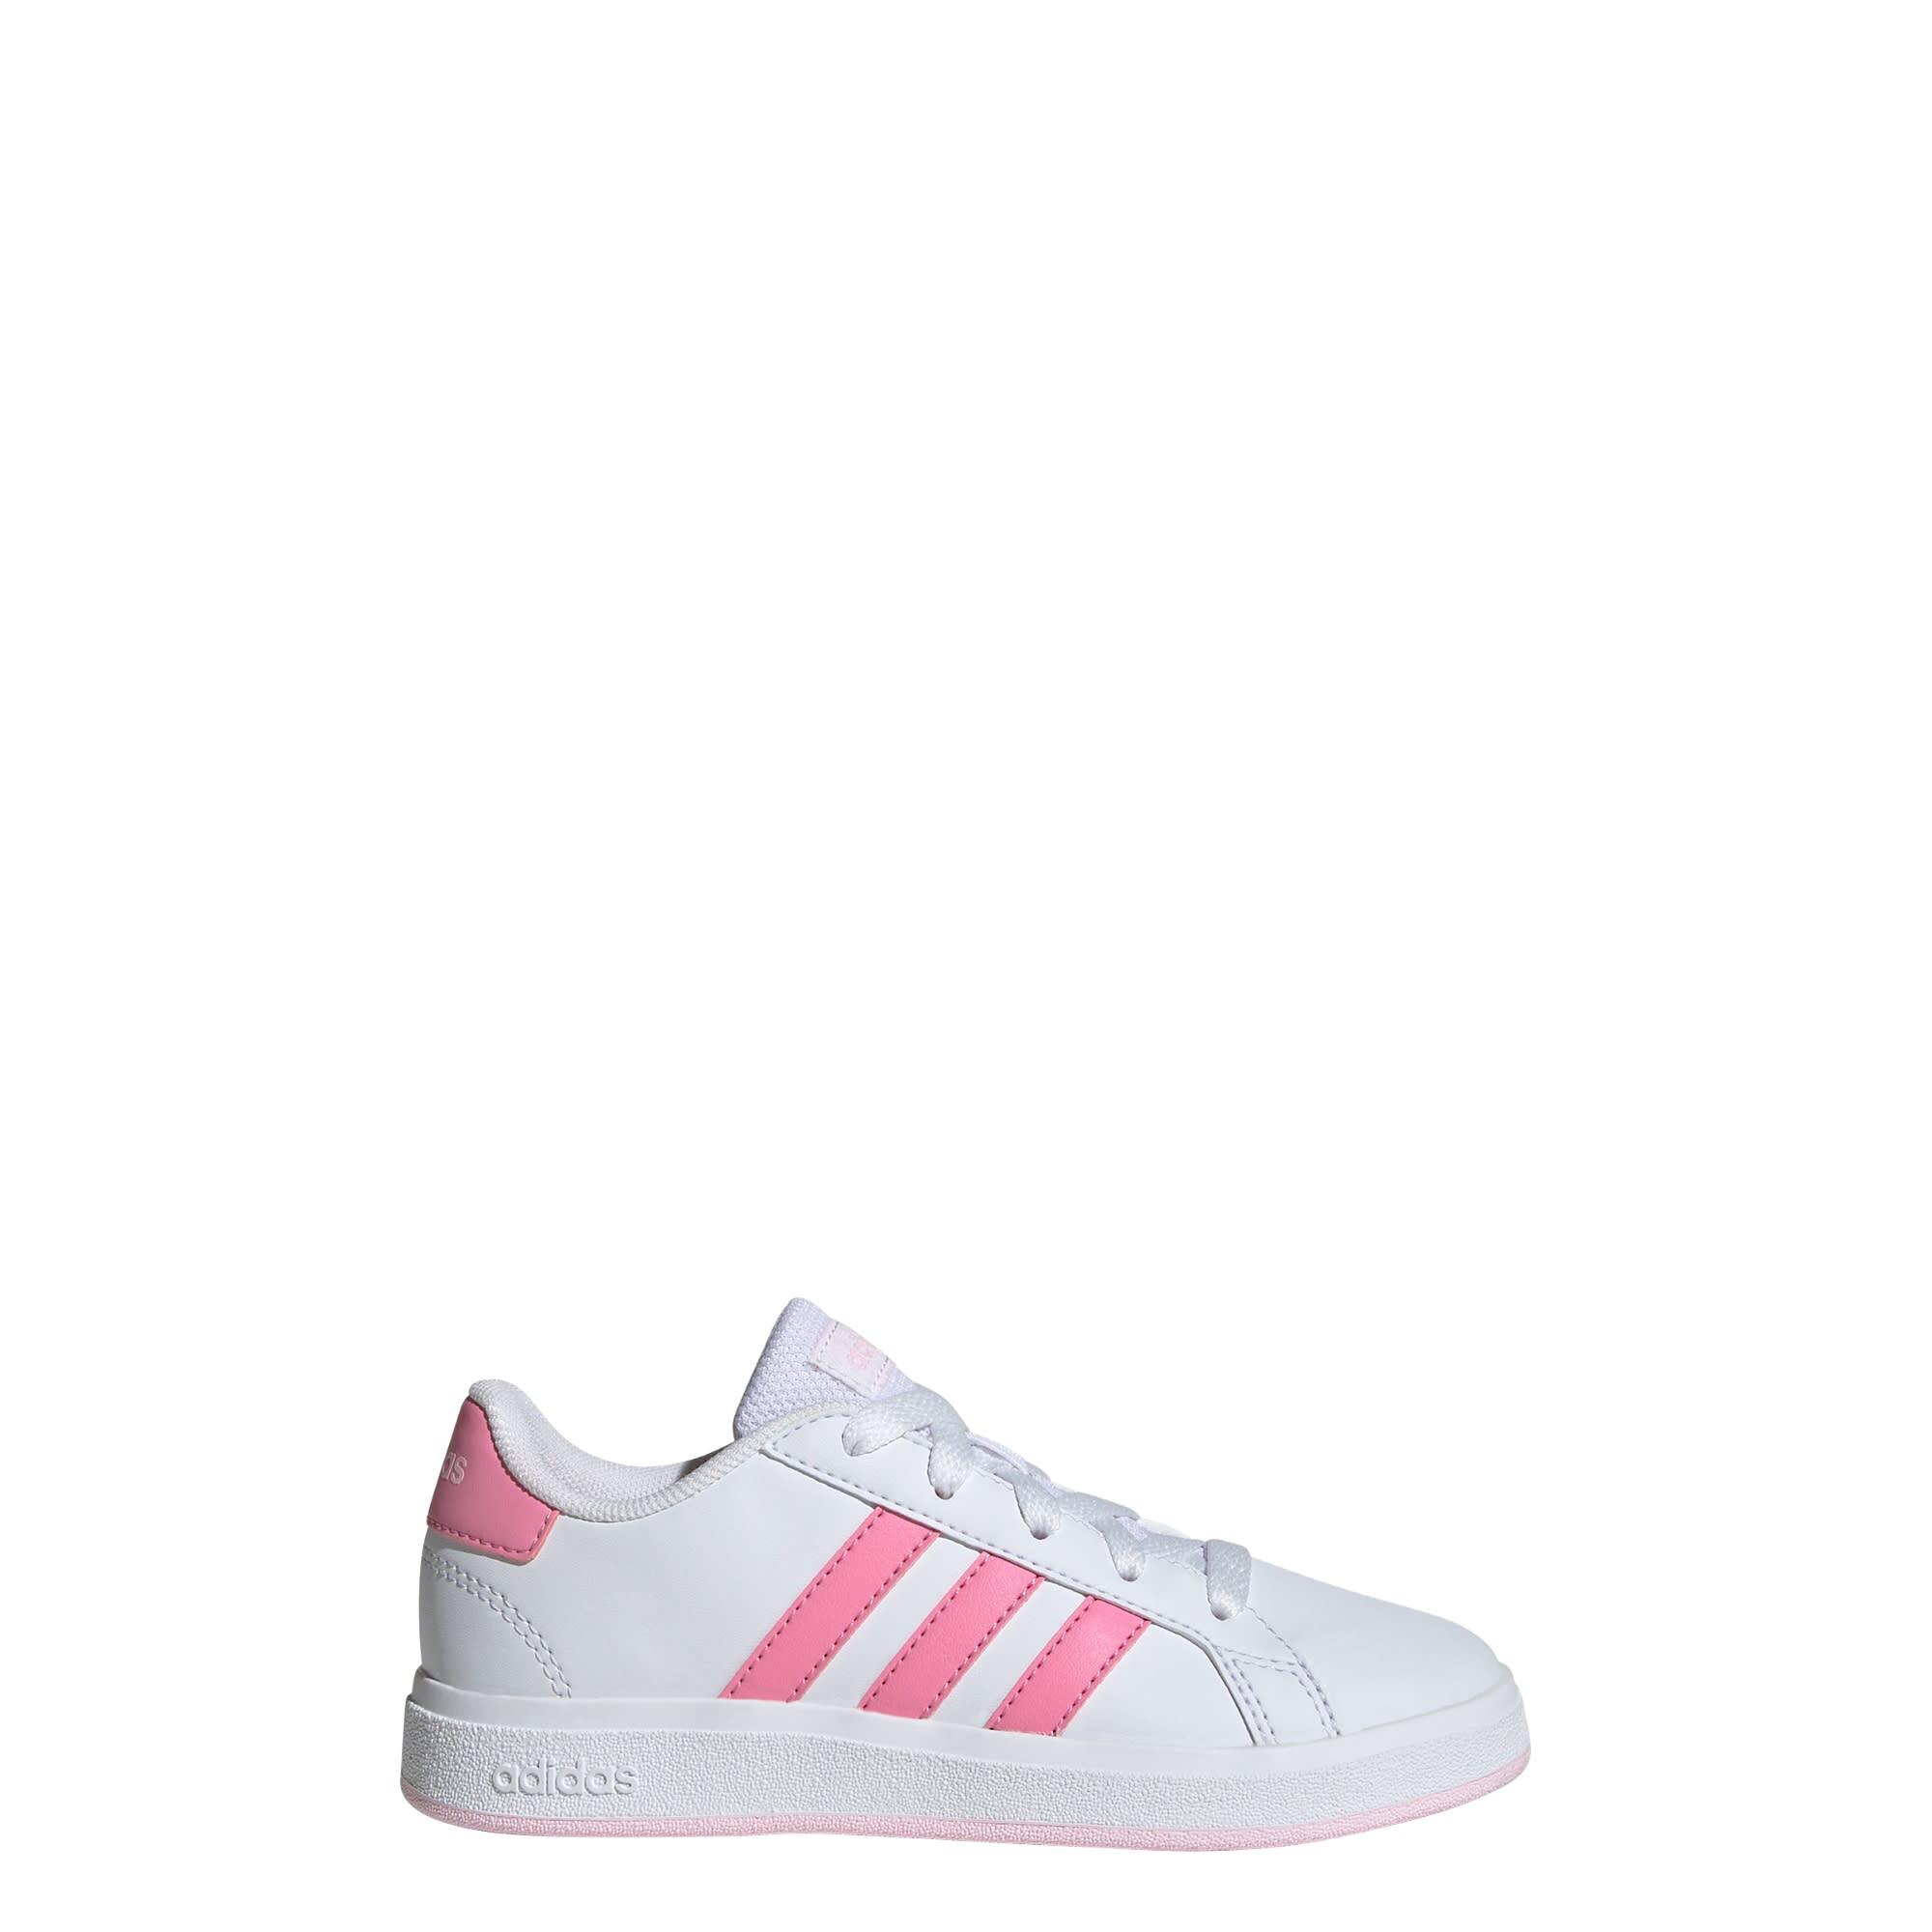 ADIDAS Grand Court Lifestyle Tennis Lace-Up Shoes